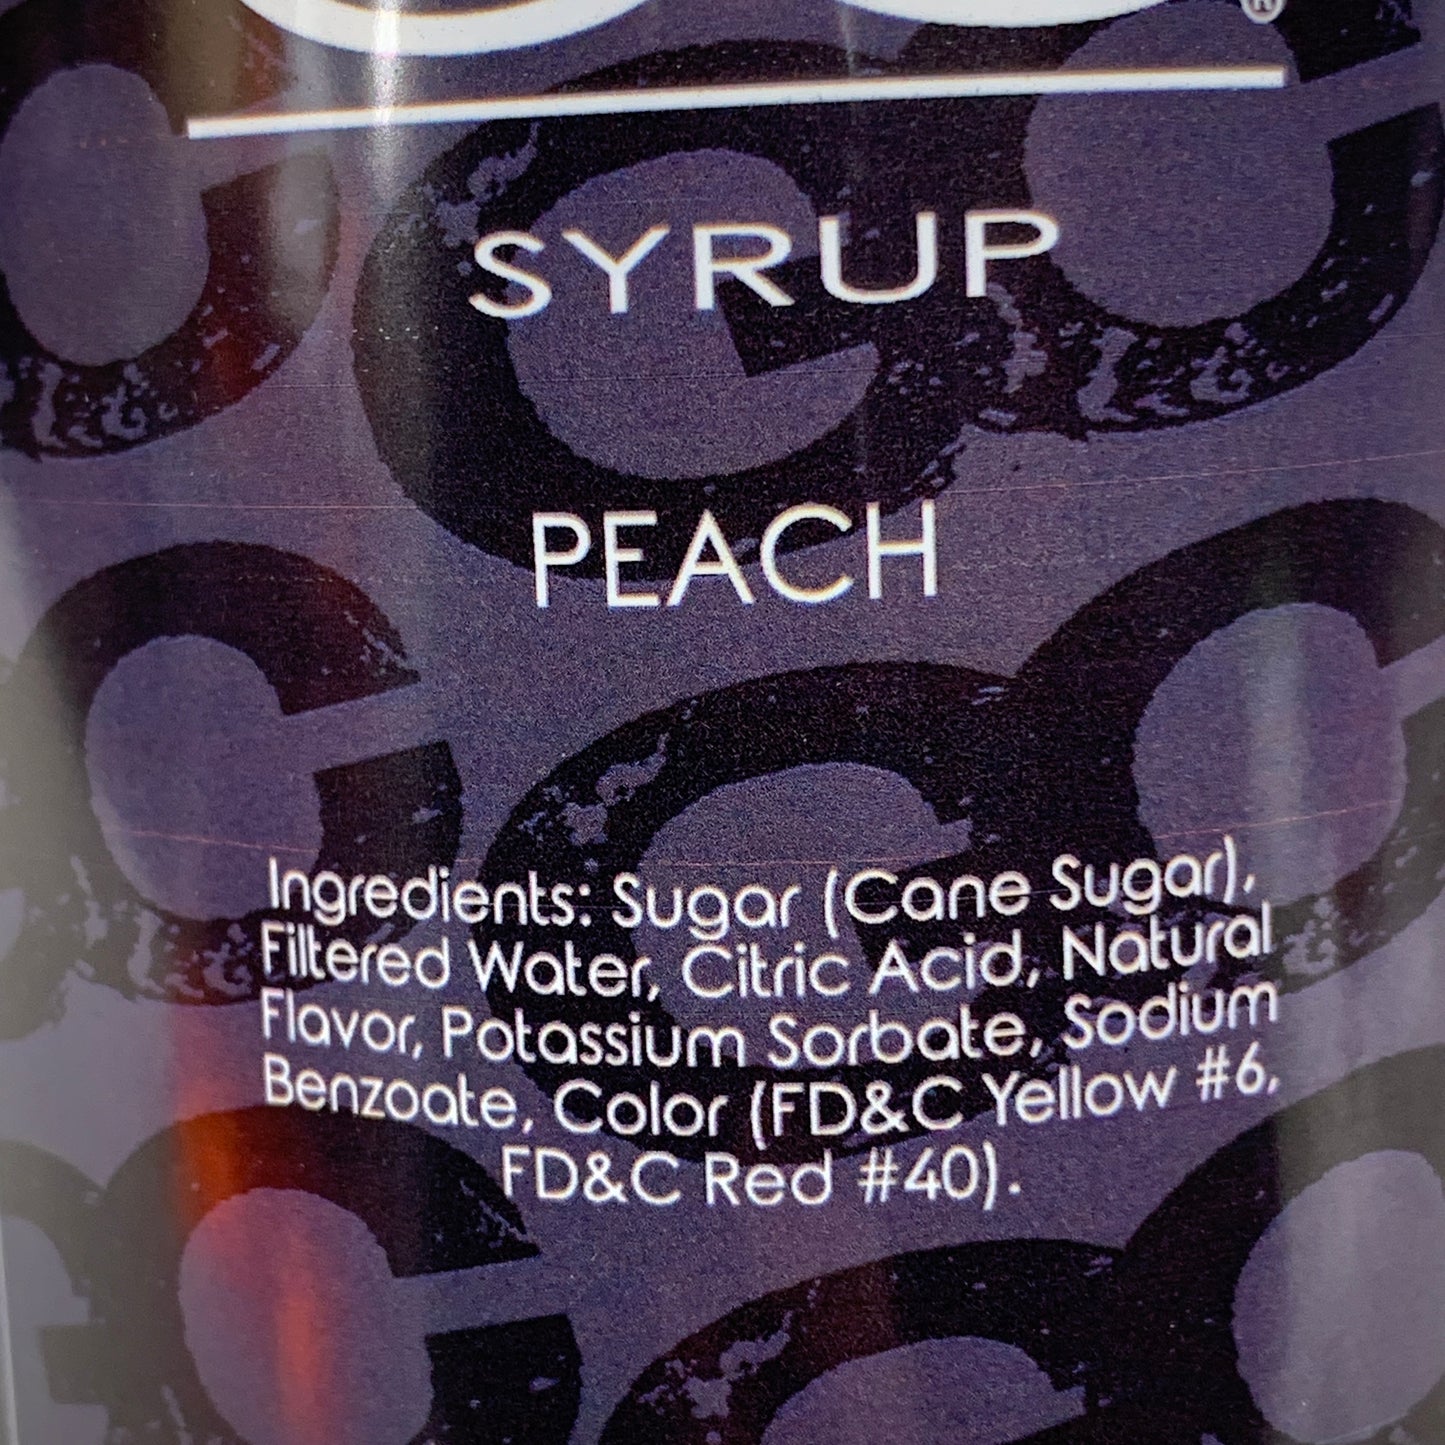 GC COFFEE CO. (3 PACK) Peach Flavoring Syrup 32 fl oz BB 12/24 0303